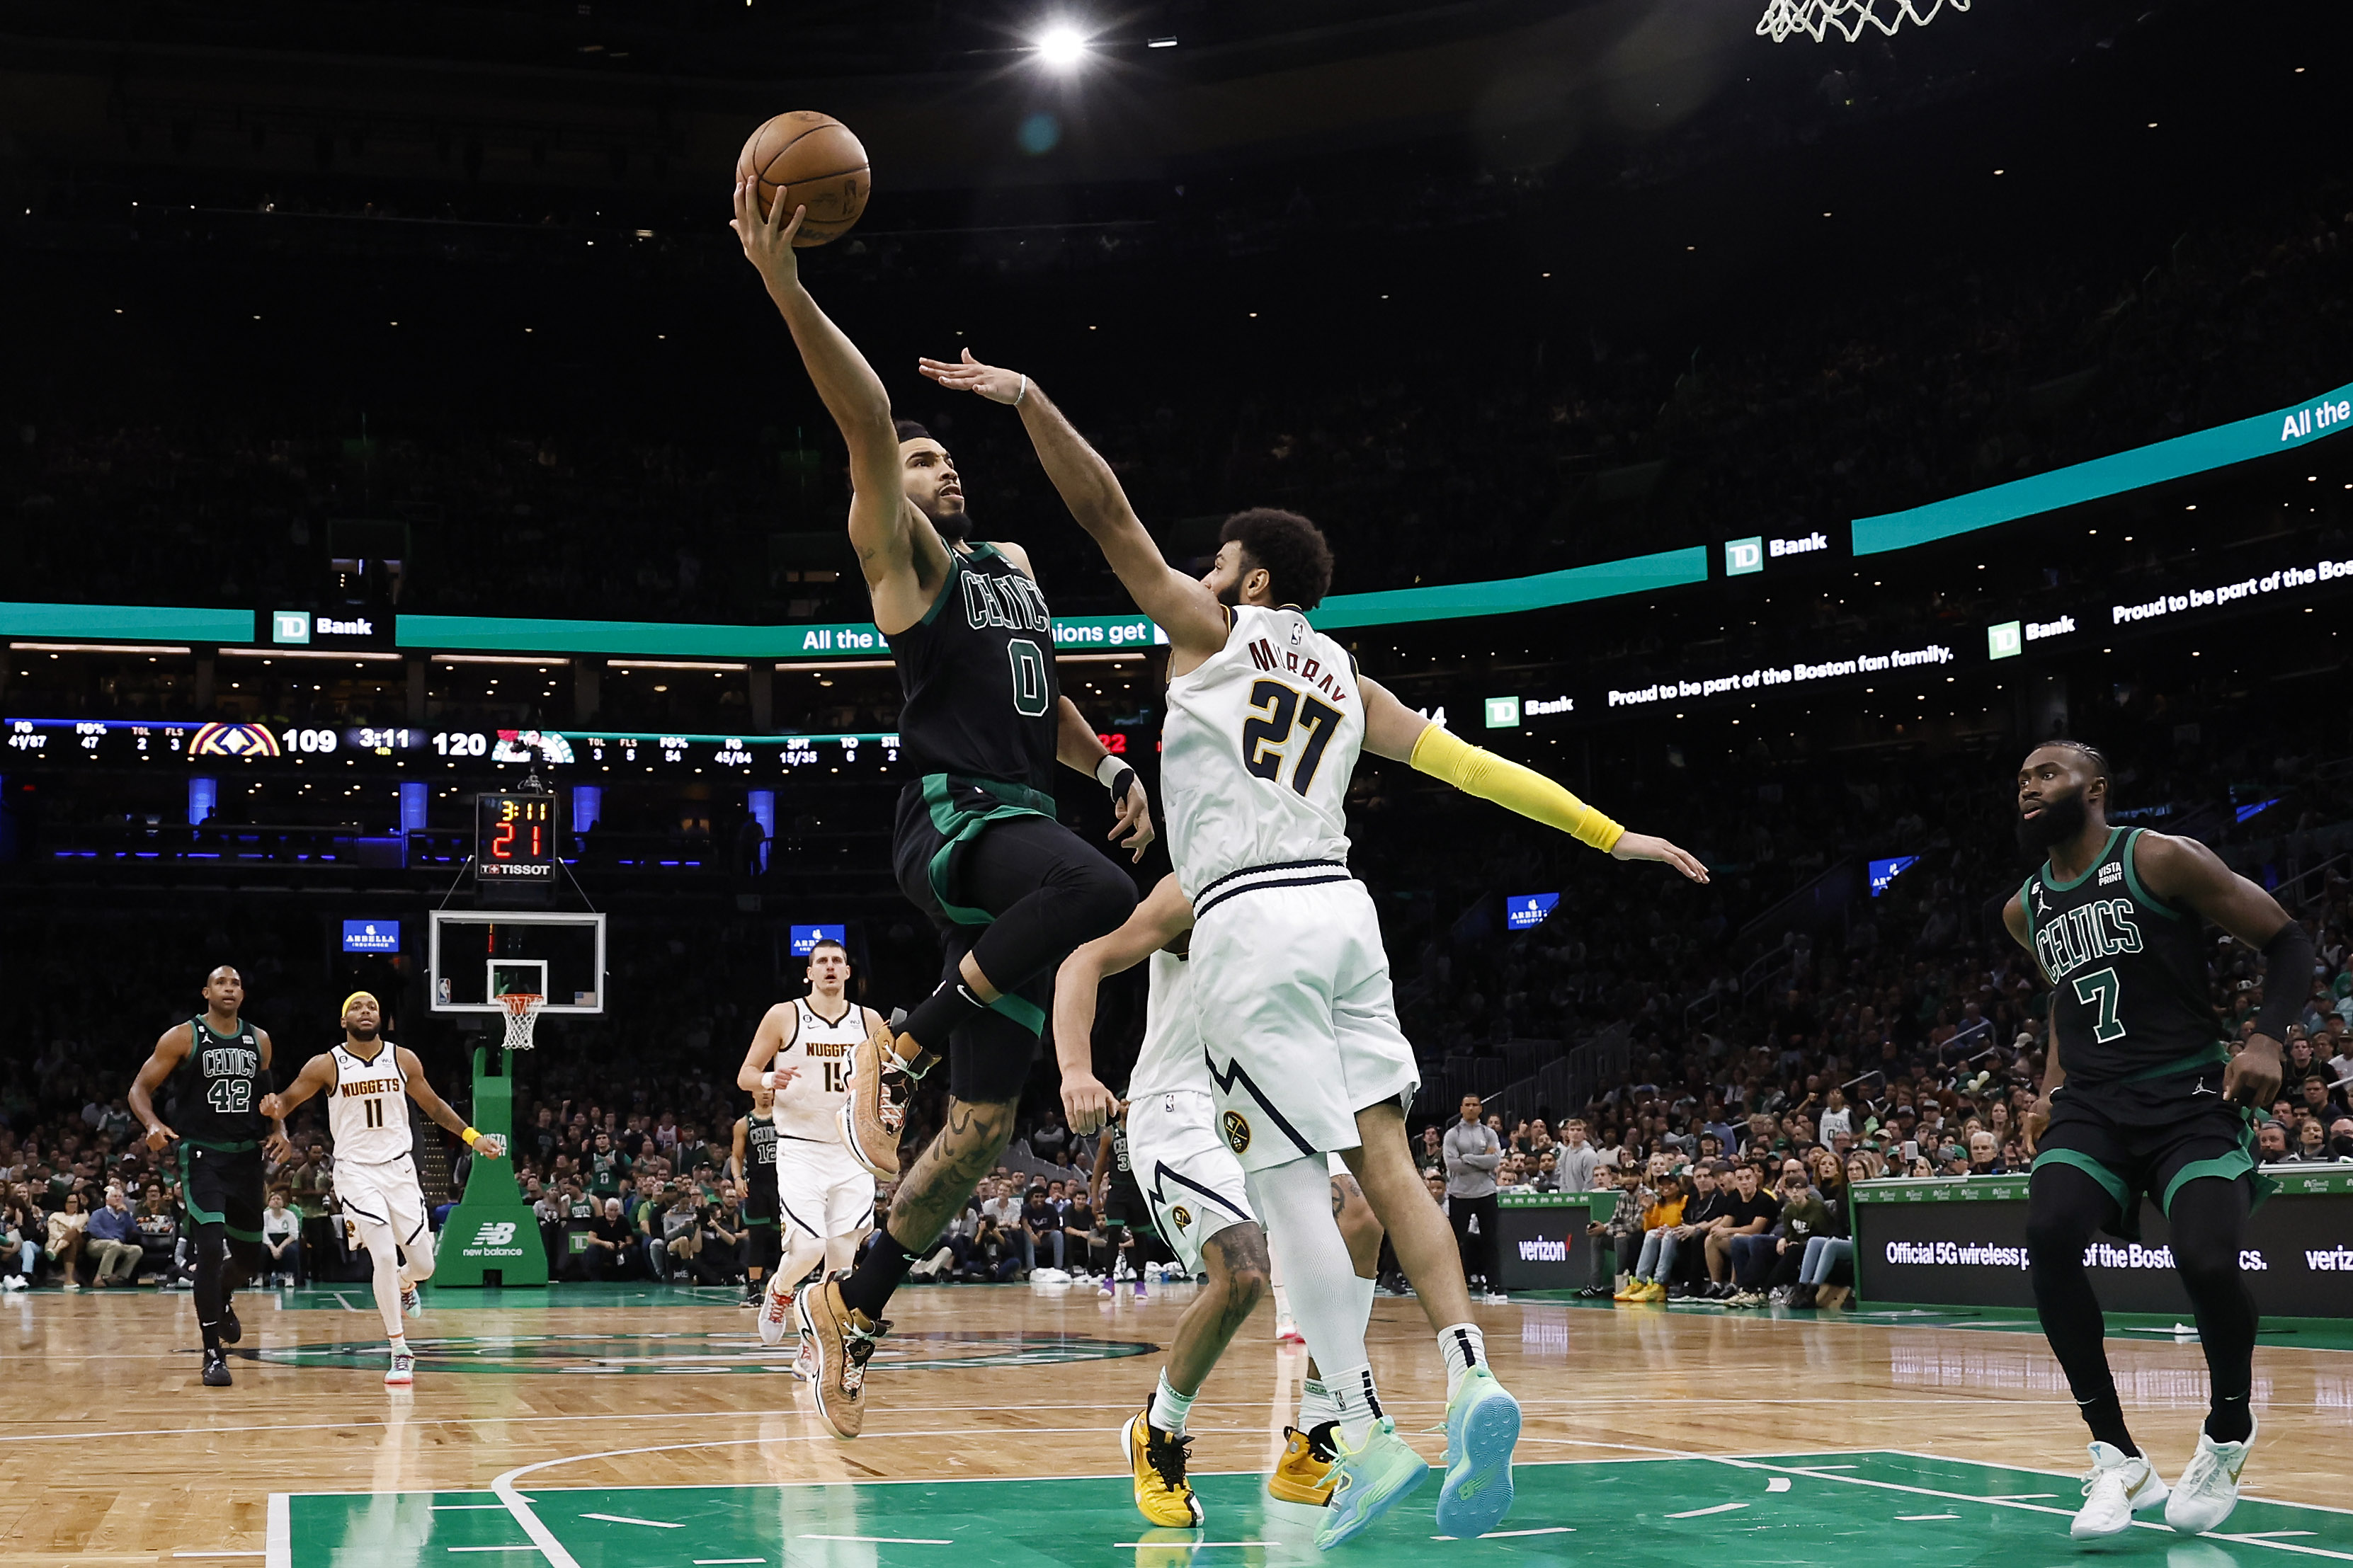 Jayson Tatum of the Boston Celtics goes to the basket against Jamal Murray of the Denver Nuggets.